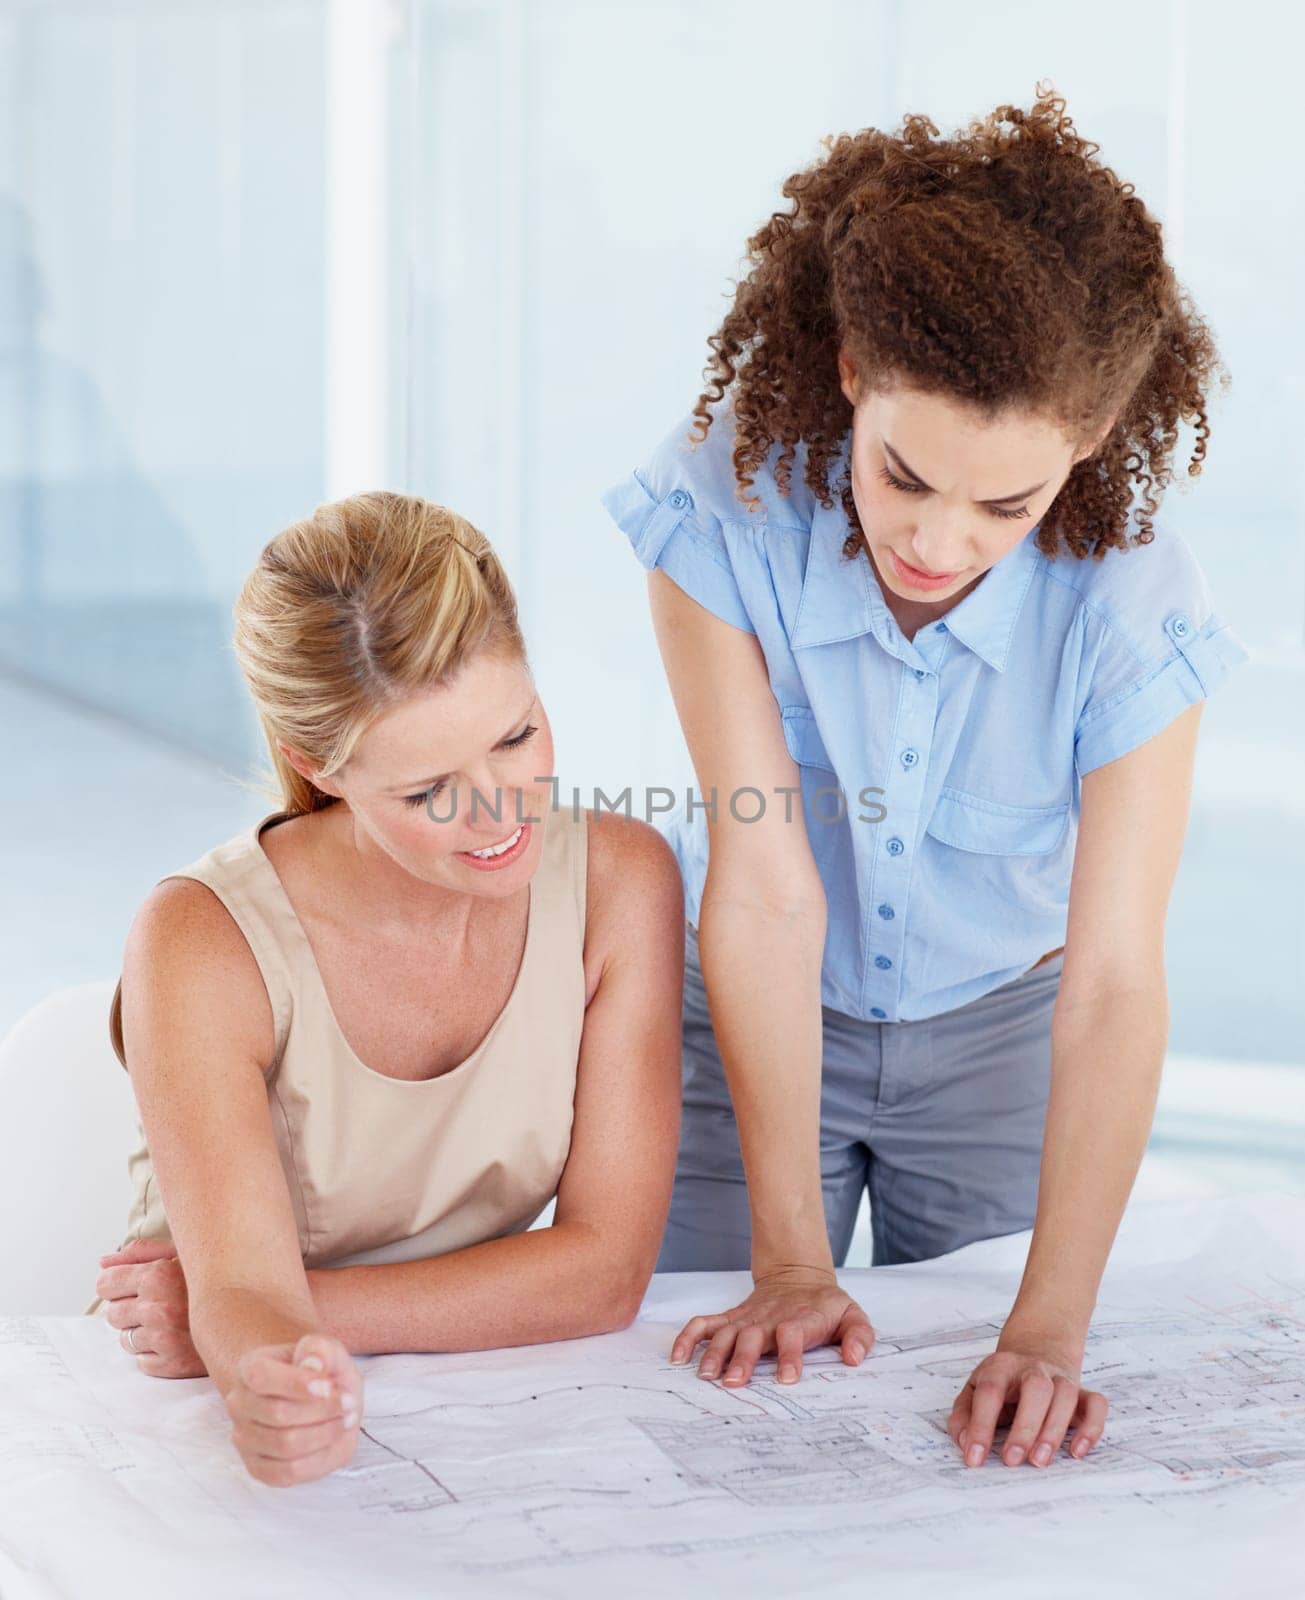 Confused business people, architect and blueprint in planning, strategy or brainstorming construction at office. Employee women working on architecture in doubt for project, document or floor plan.